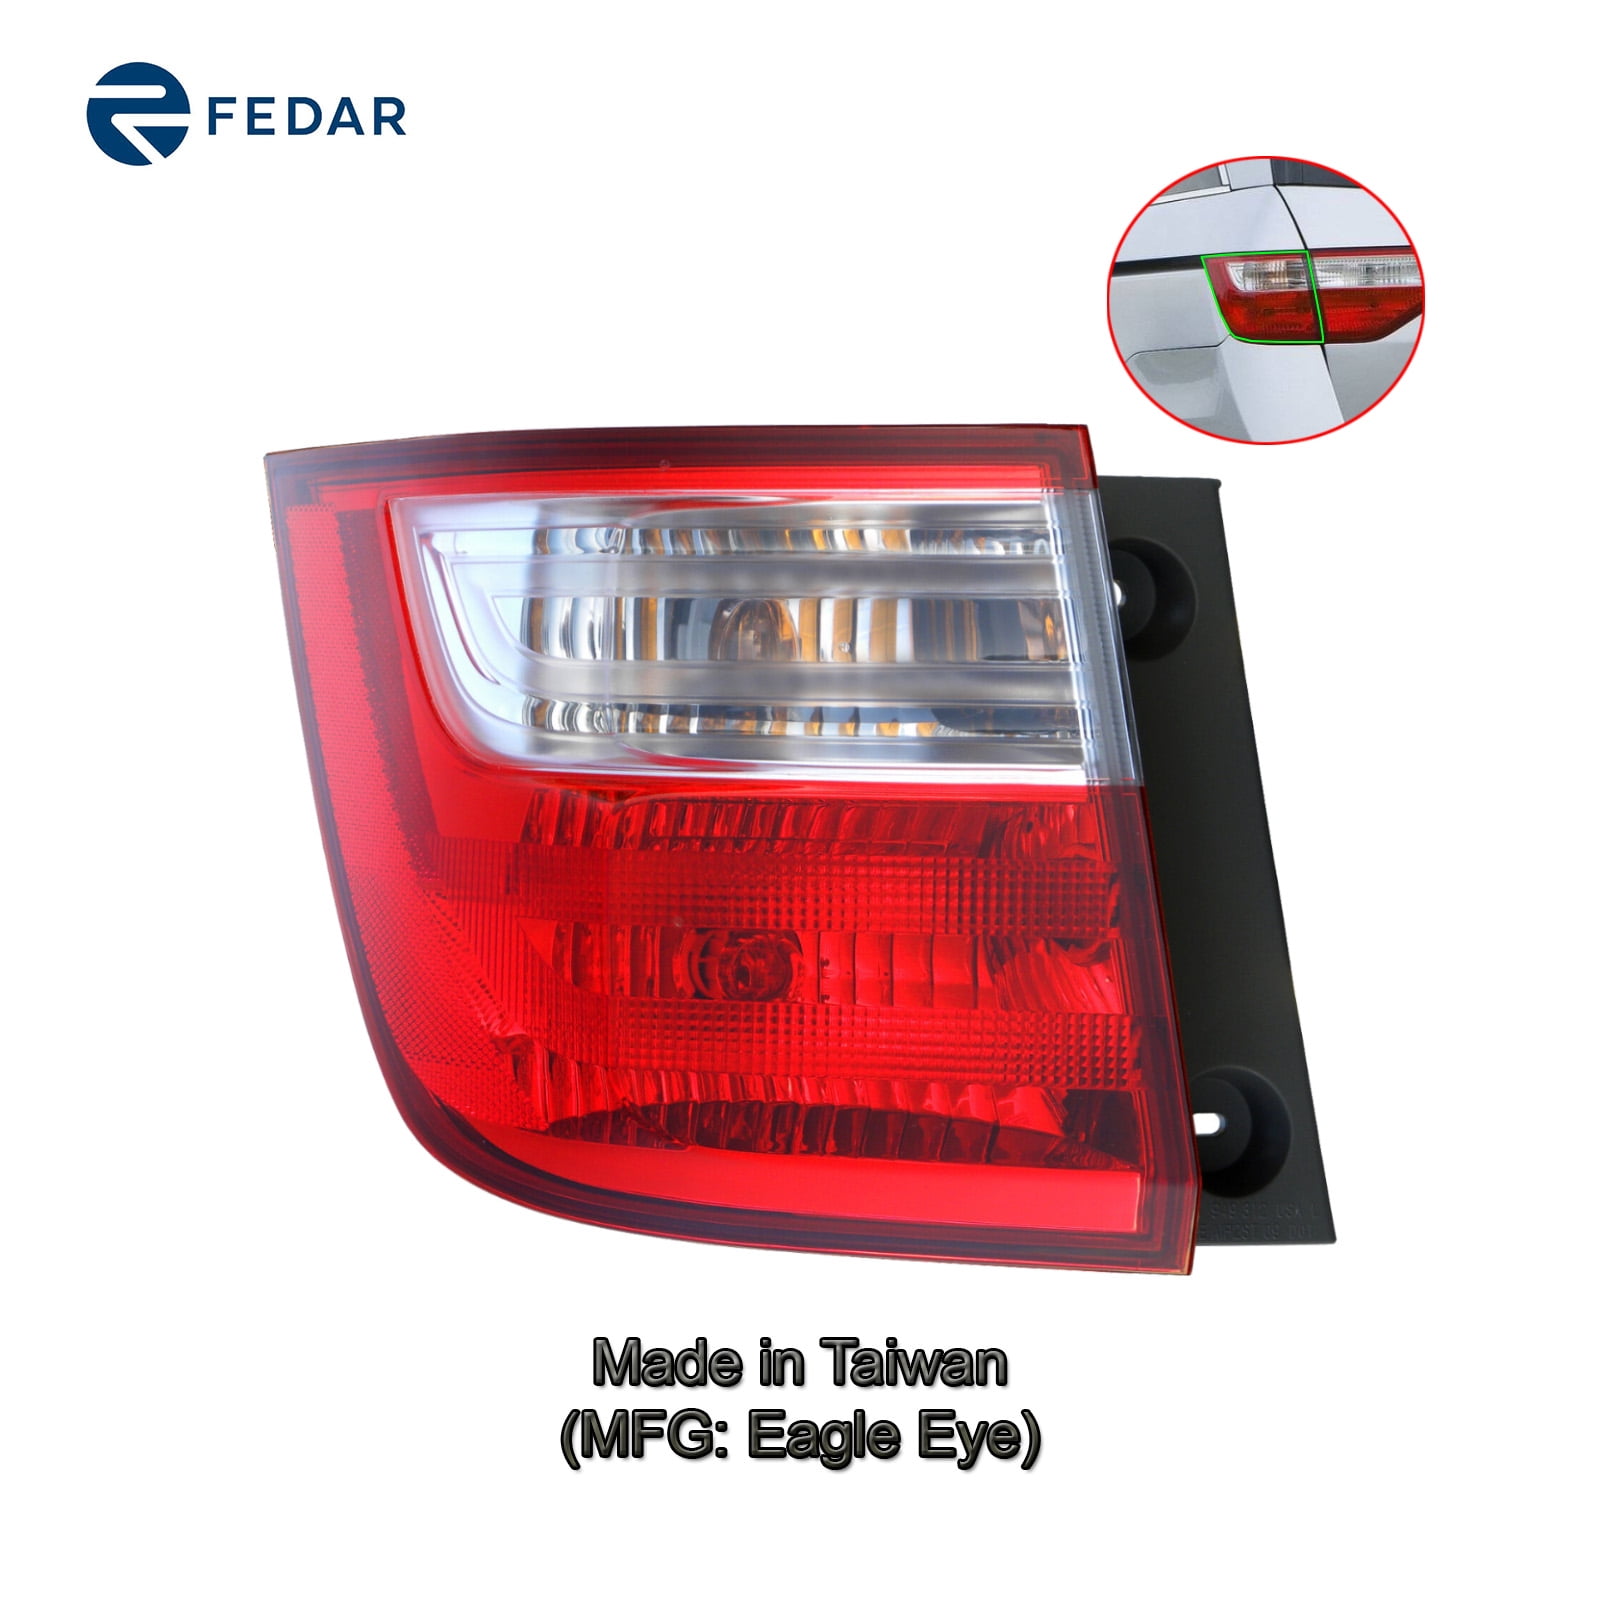 Tail Light Lamp Fit 2011 2012 Honda Odyssey Driver Side - Walmart.com - Walmart.com 2012 Honda Odyssey Tail Light Bulb Replacement